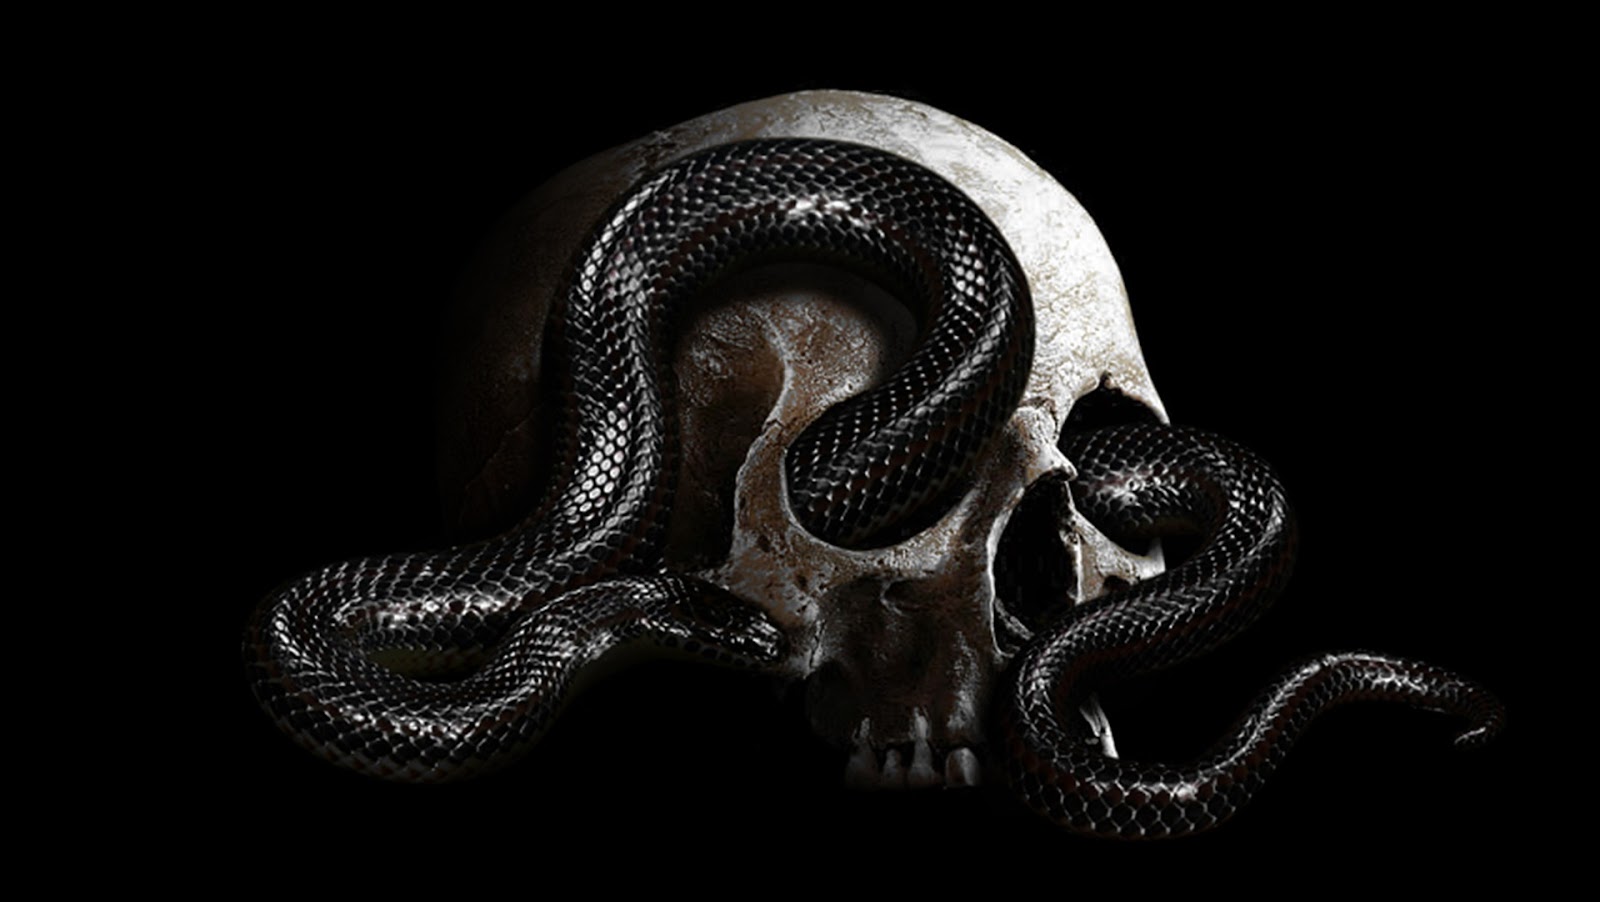 Image of a snake crawling through the eye sockets of a human skull on black background